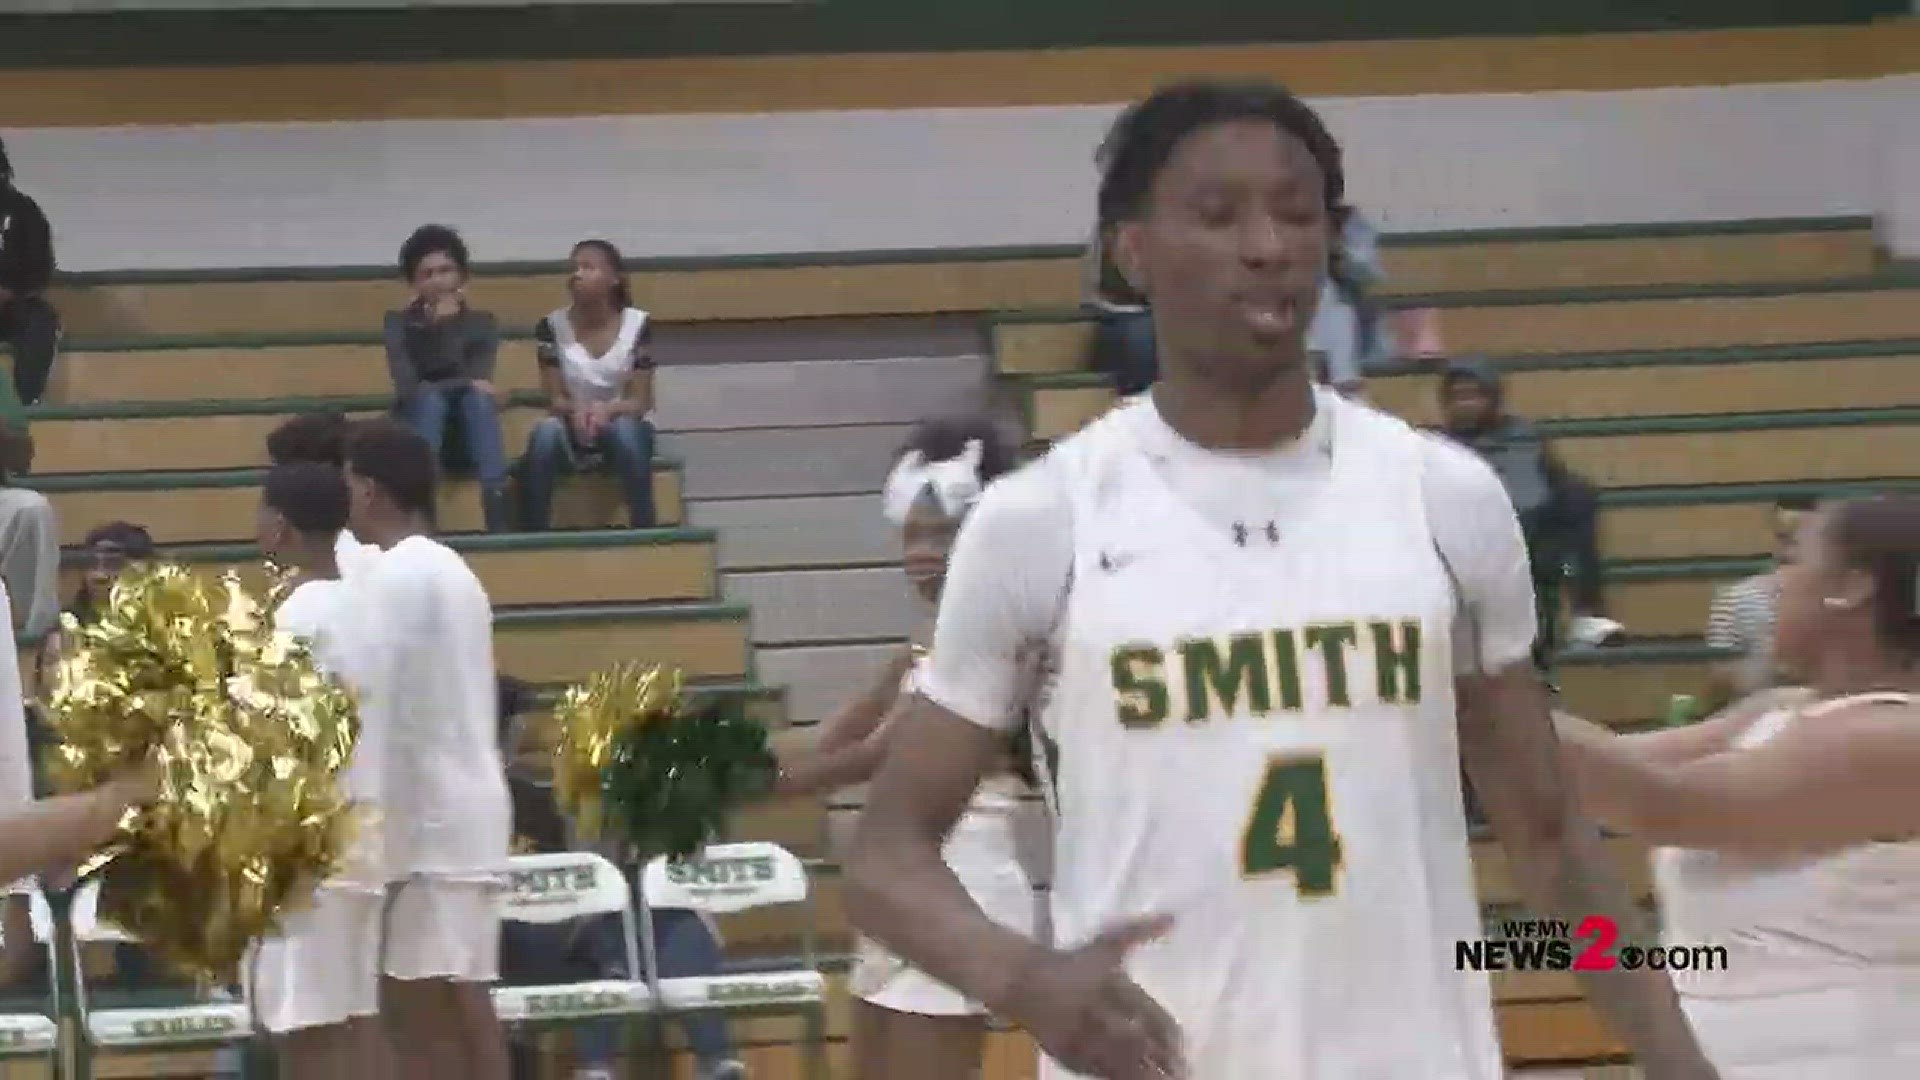 Smith Beats Jay M. Robinson 72-61 To Advance In State Playoffs